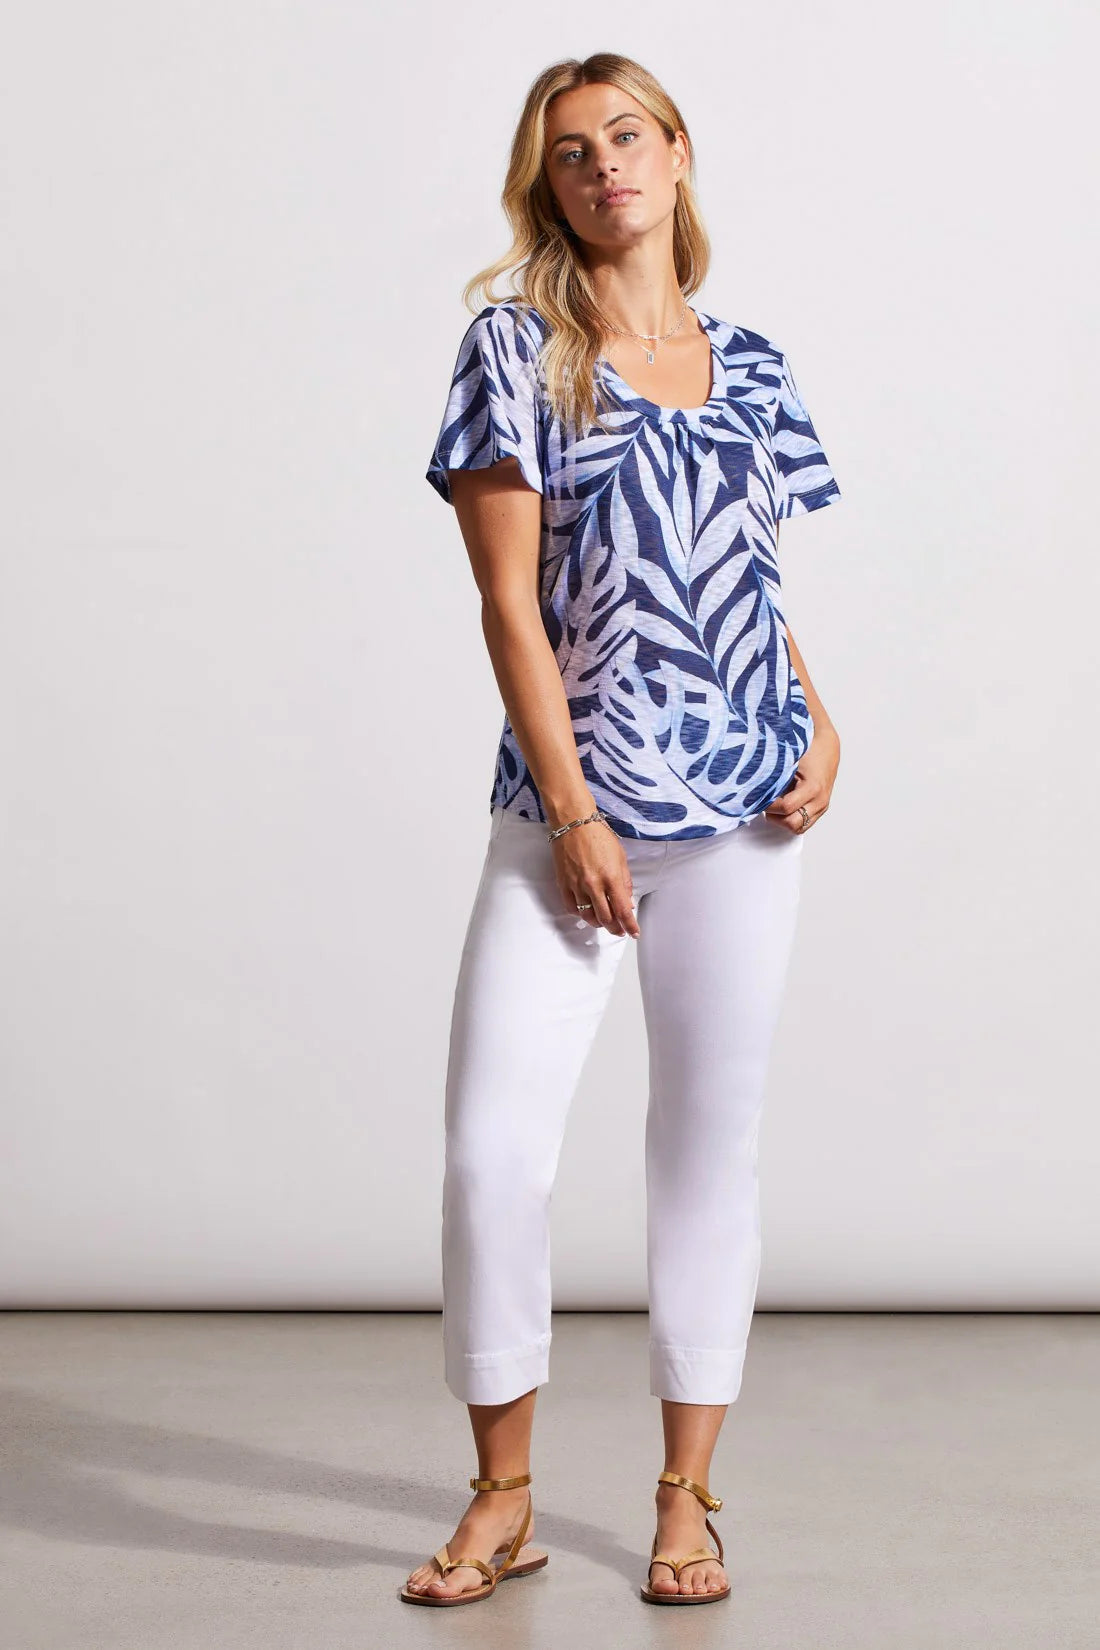 We know you'll love this flirty top as much as we do. Flutter sleeves and a U-shaped neckline add to neck shirring and a curved hem. The soft printed knit keeps thing slight and flowy.